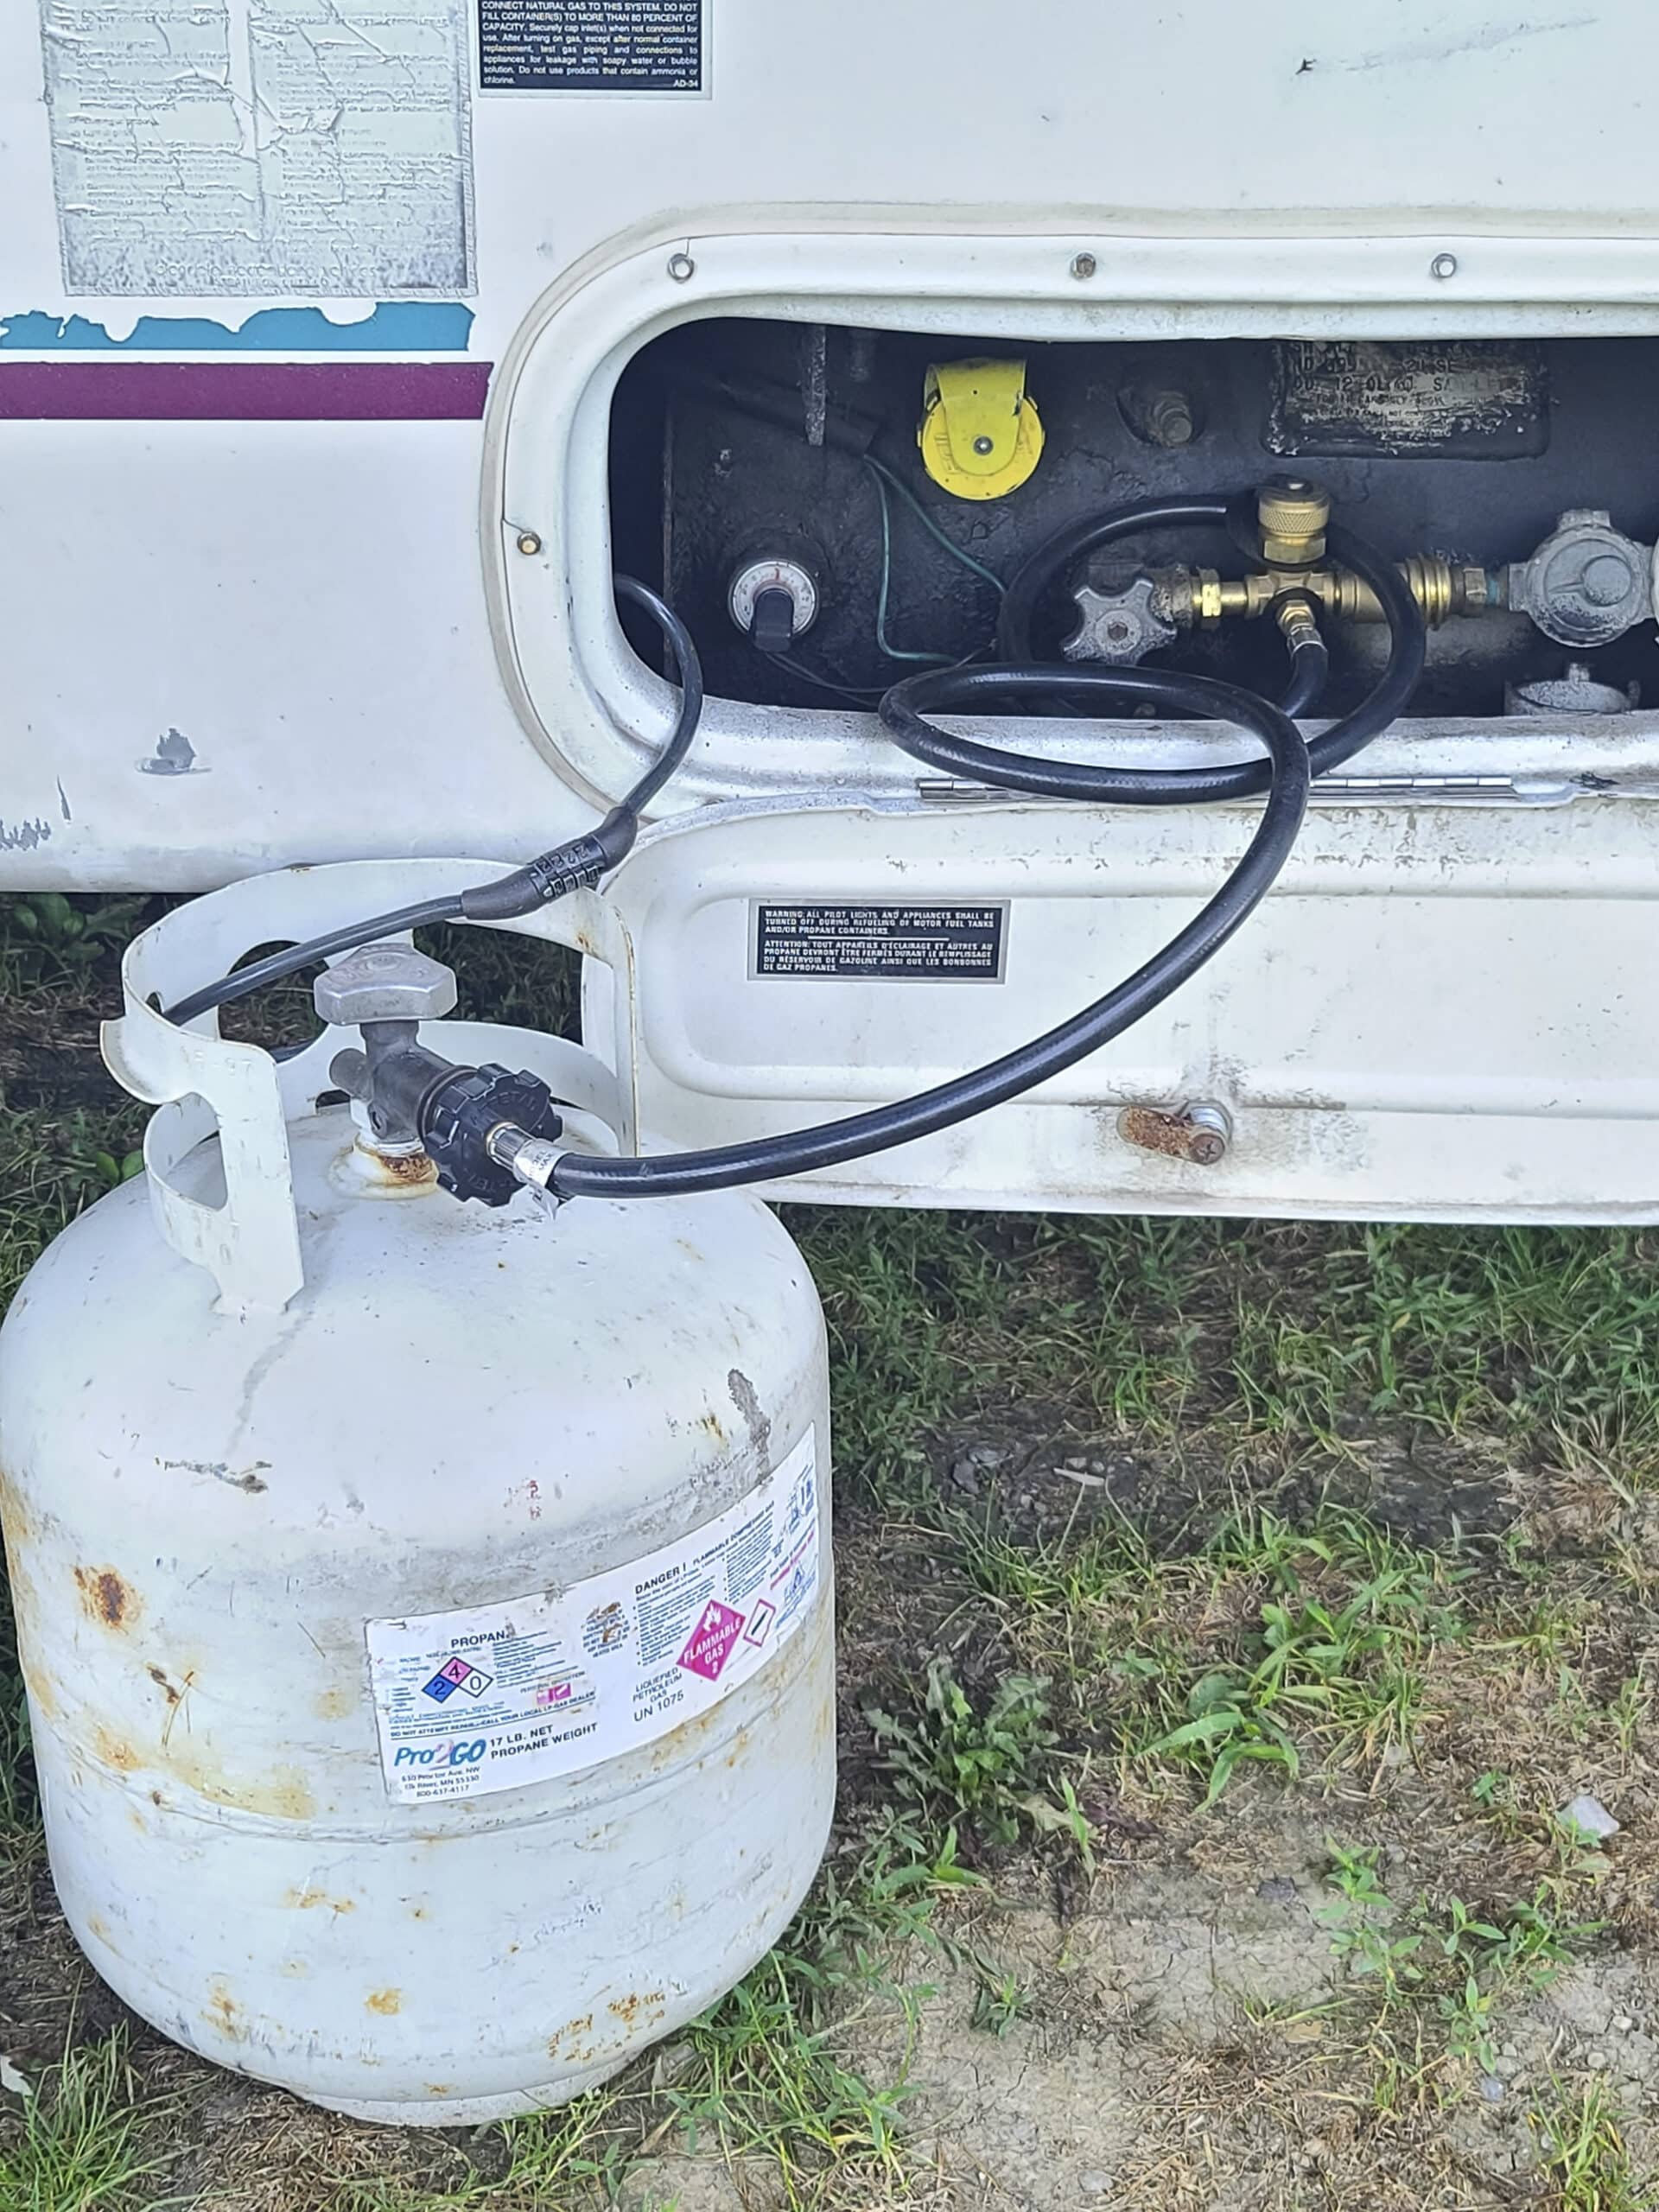 The propane tank and fill port of an RV. A barbecue propane tank is seen connected via a black hose.